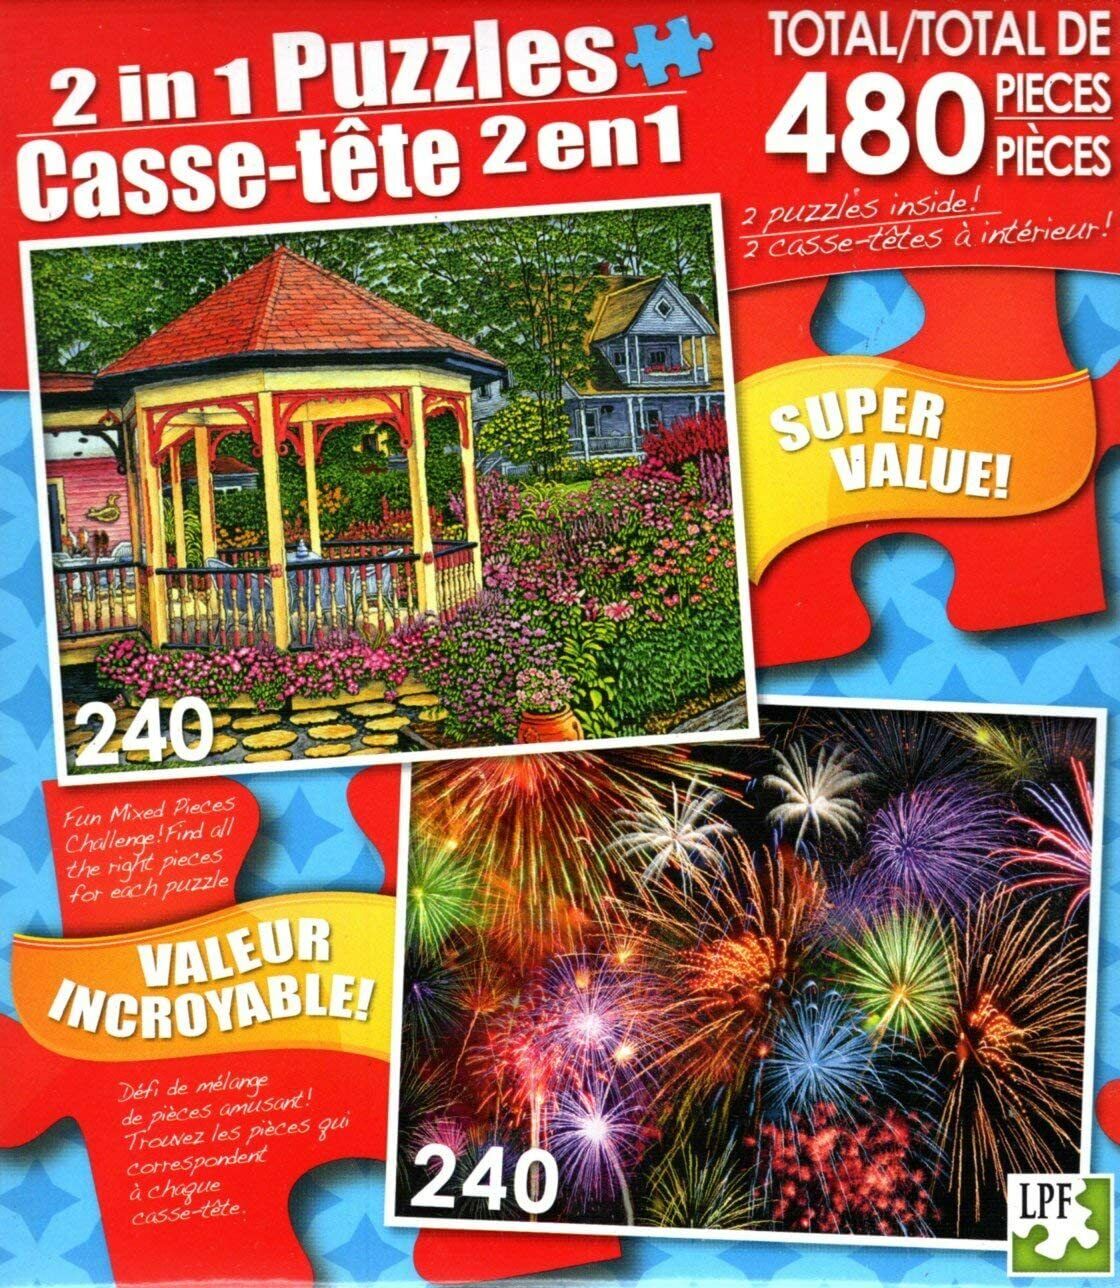 Gazebo at Chautauqua - Colorful Fireworks - Total 480 Piece 2 in 1 Puzzles